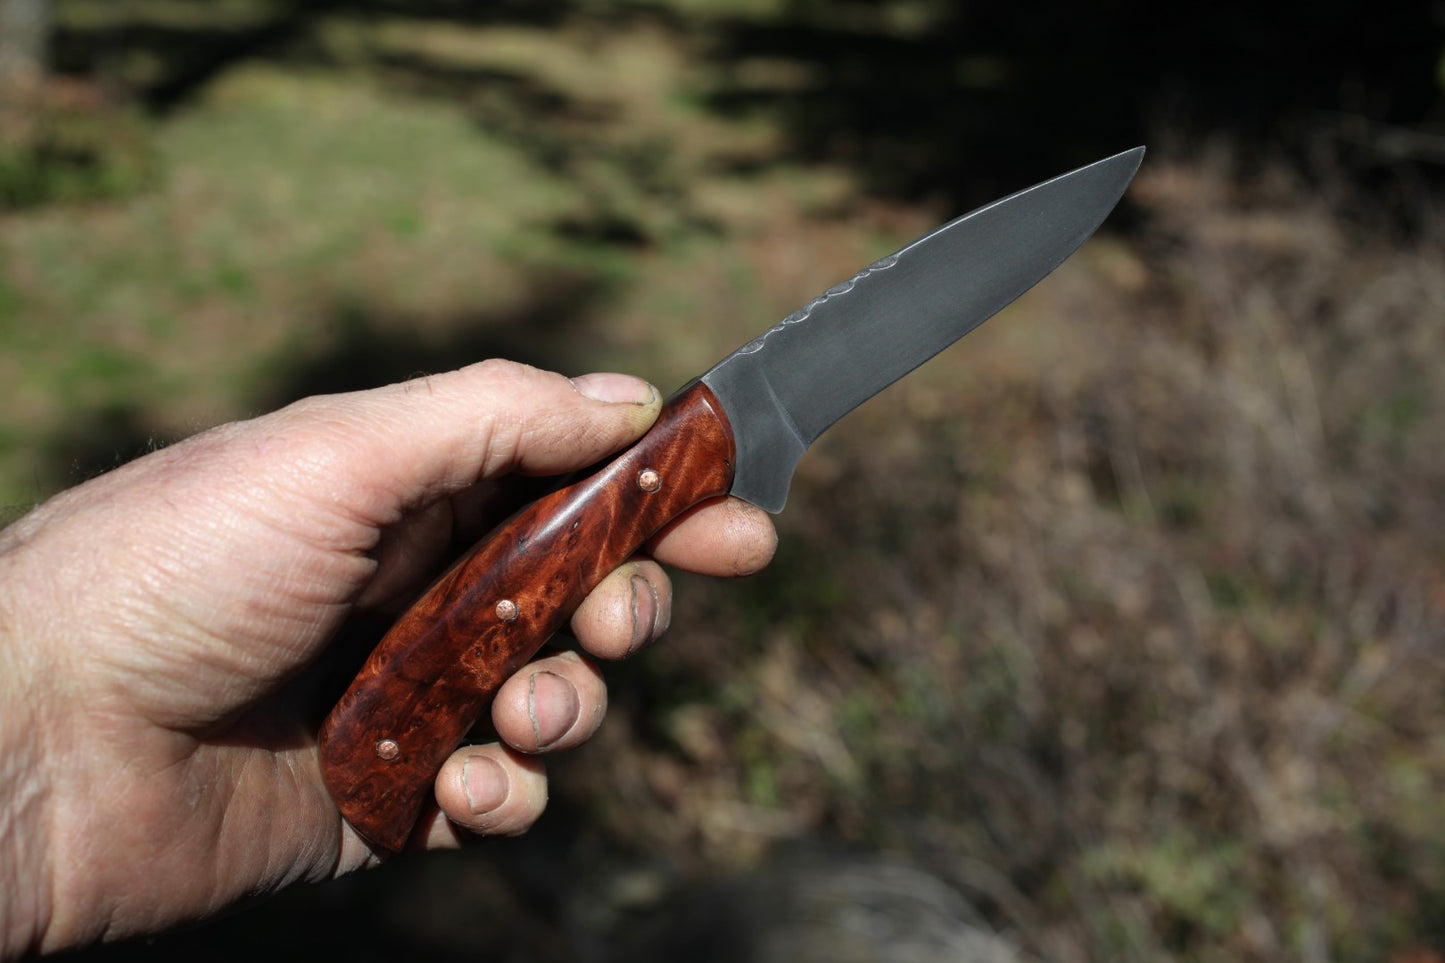 Bird and Trout knife, redwood burl